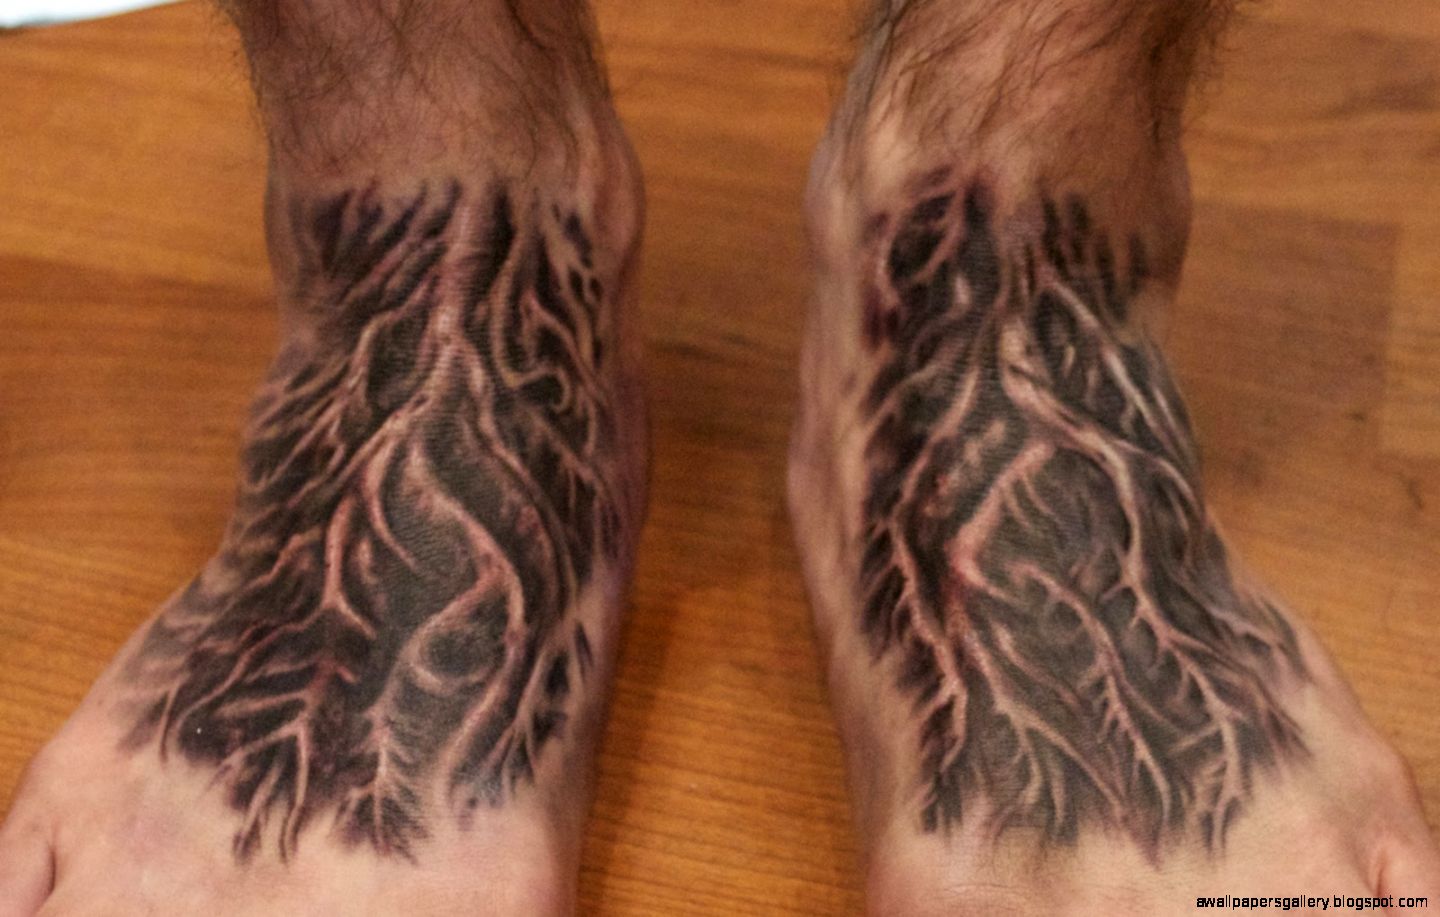 Tree With Roots Tattoo